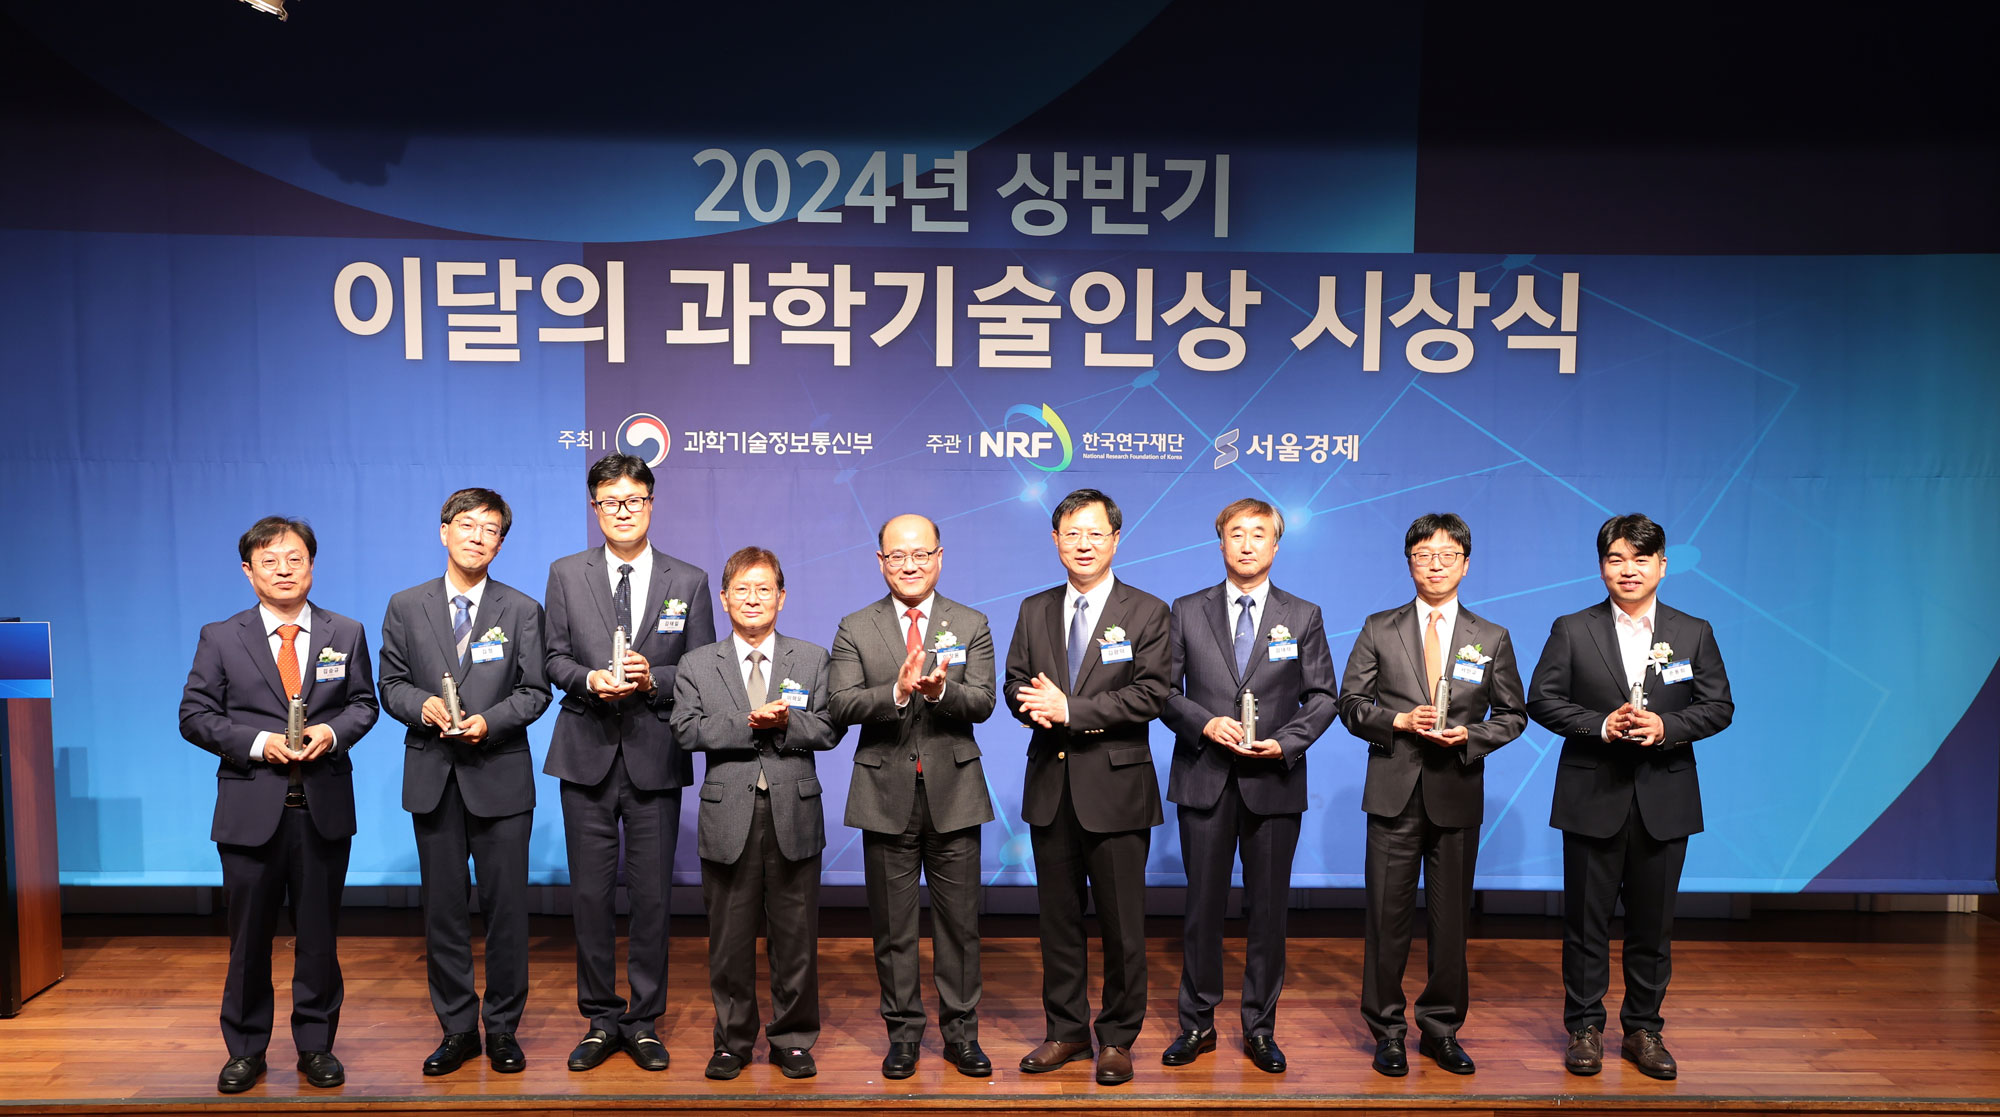 In the first half of 2024, the Science and Technology of the Month Awards_Incheon University_Professor Kim Seung-gyu